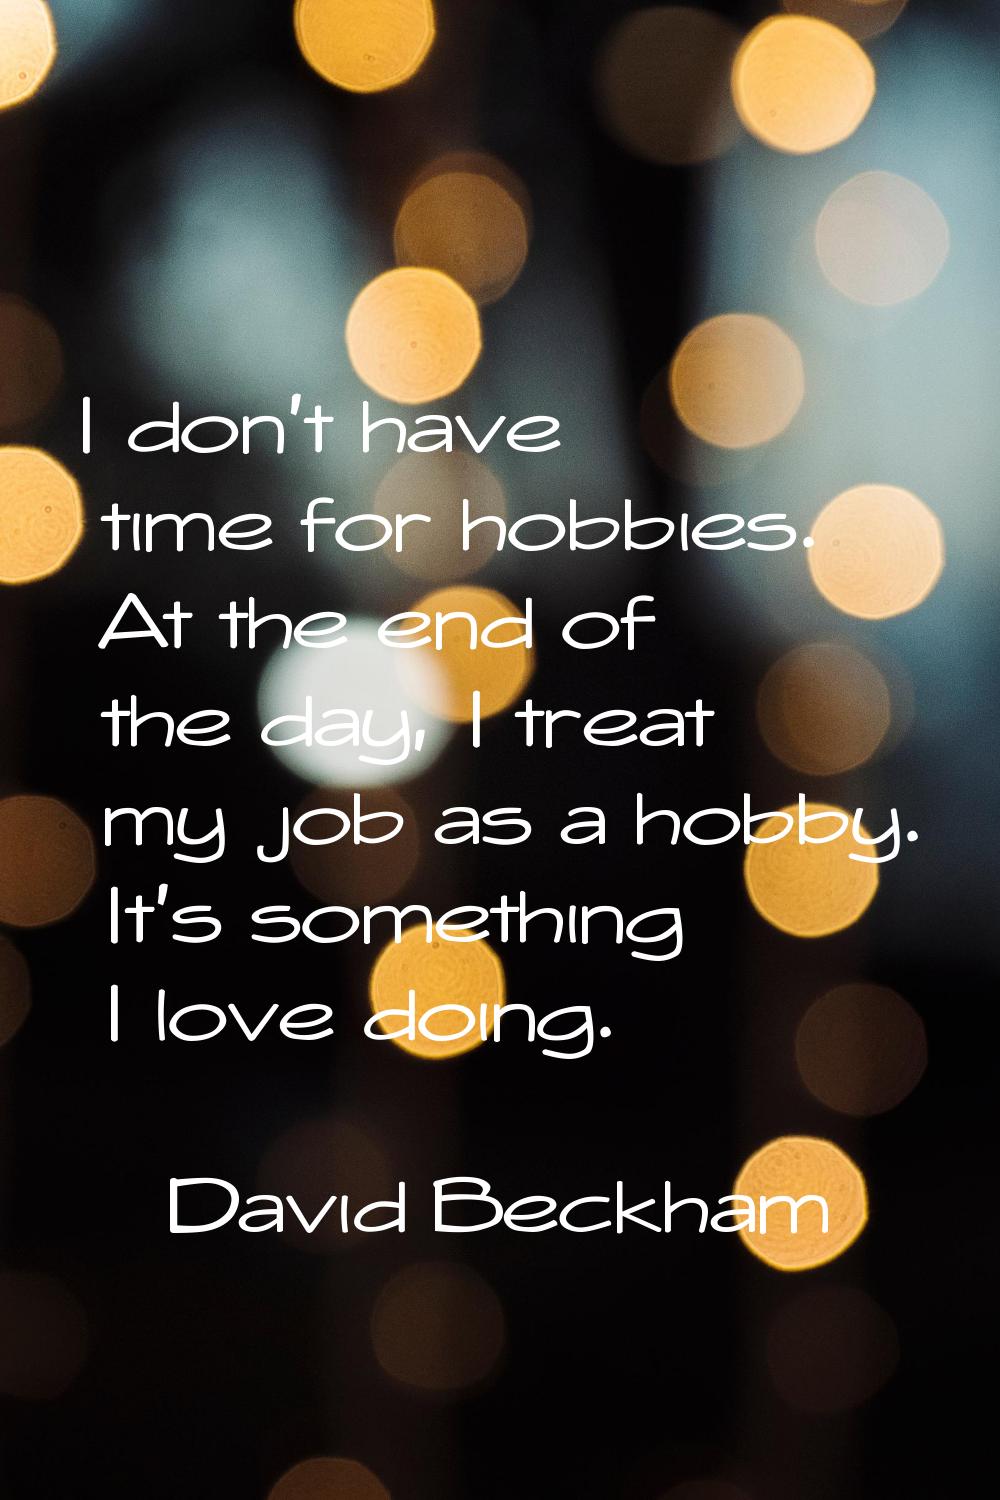 I don't have time for hobbies. At the end of the day, I treat my job as a hobby. It's something I l